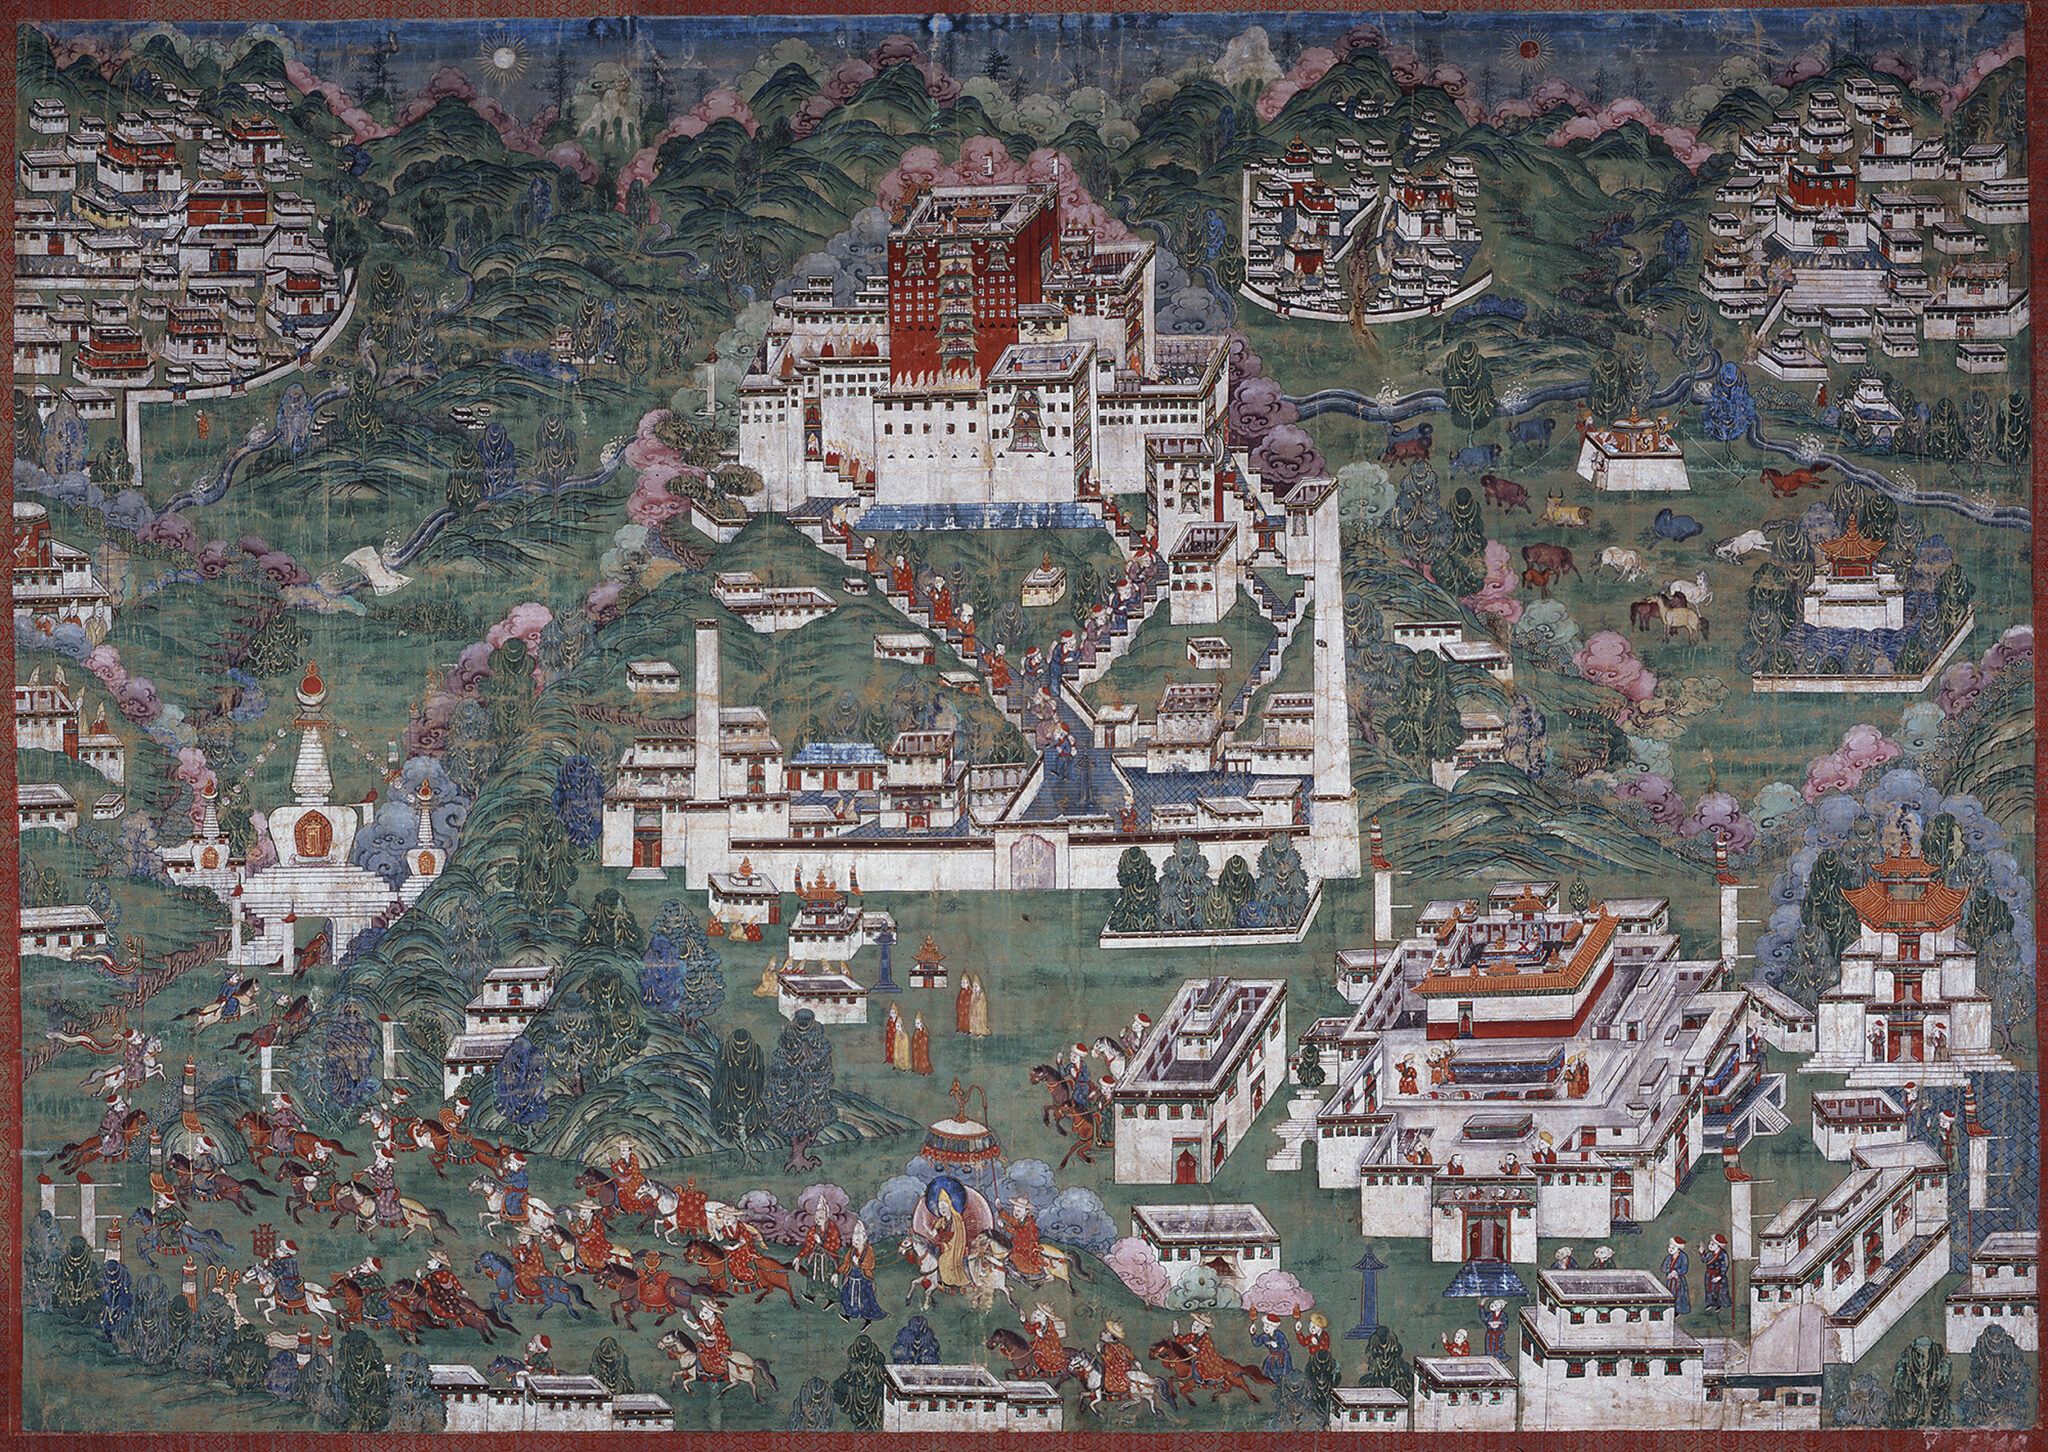 Painting depicting bird’s-eye view of prominent palace, temples, and monasteries in green mountain valley